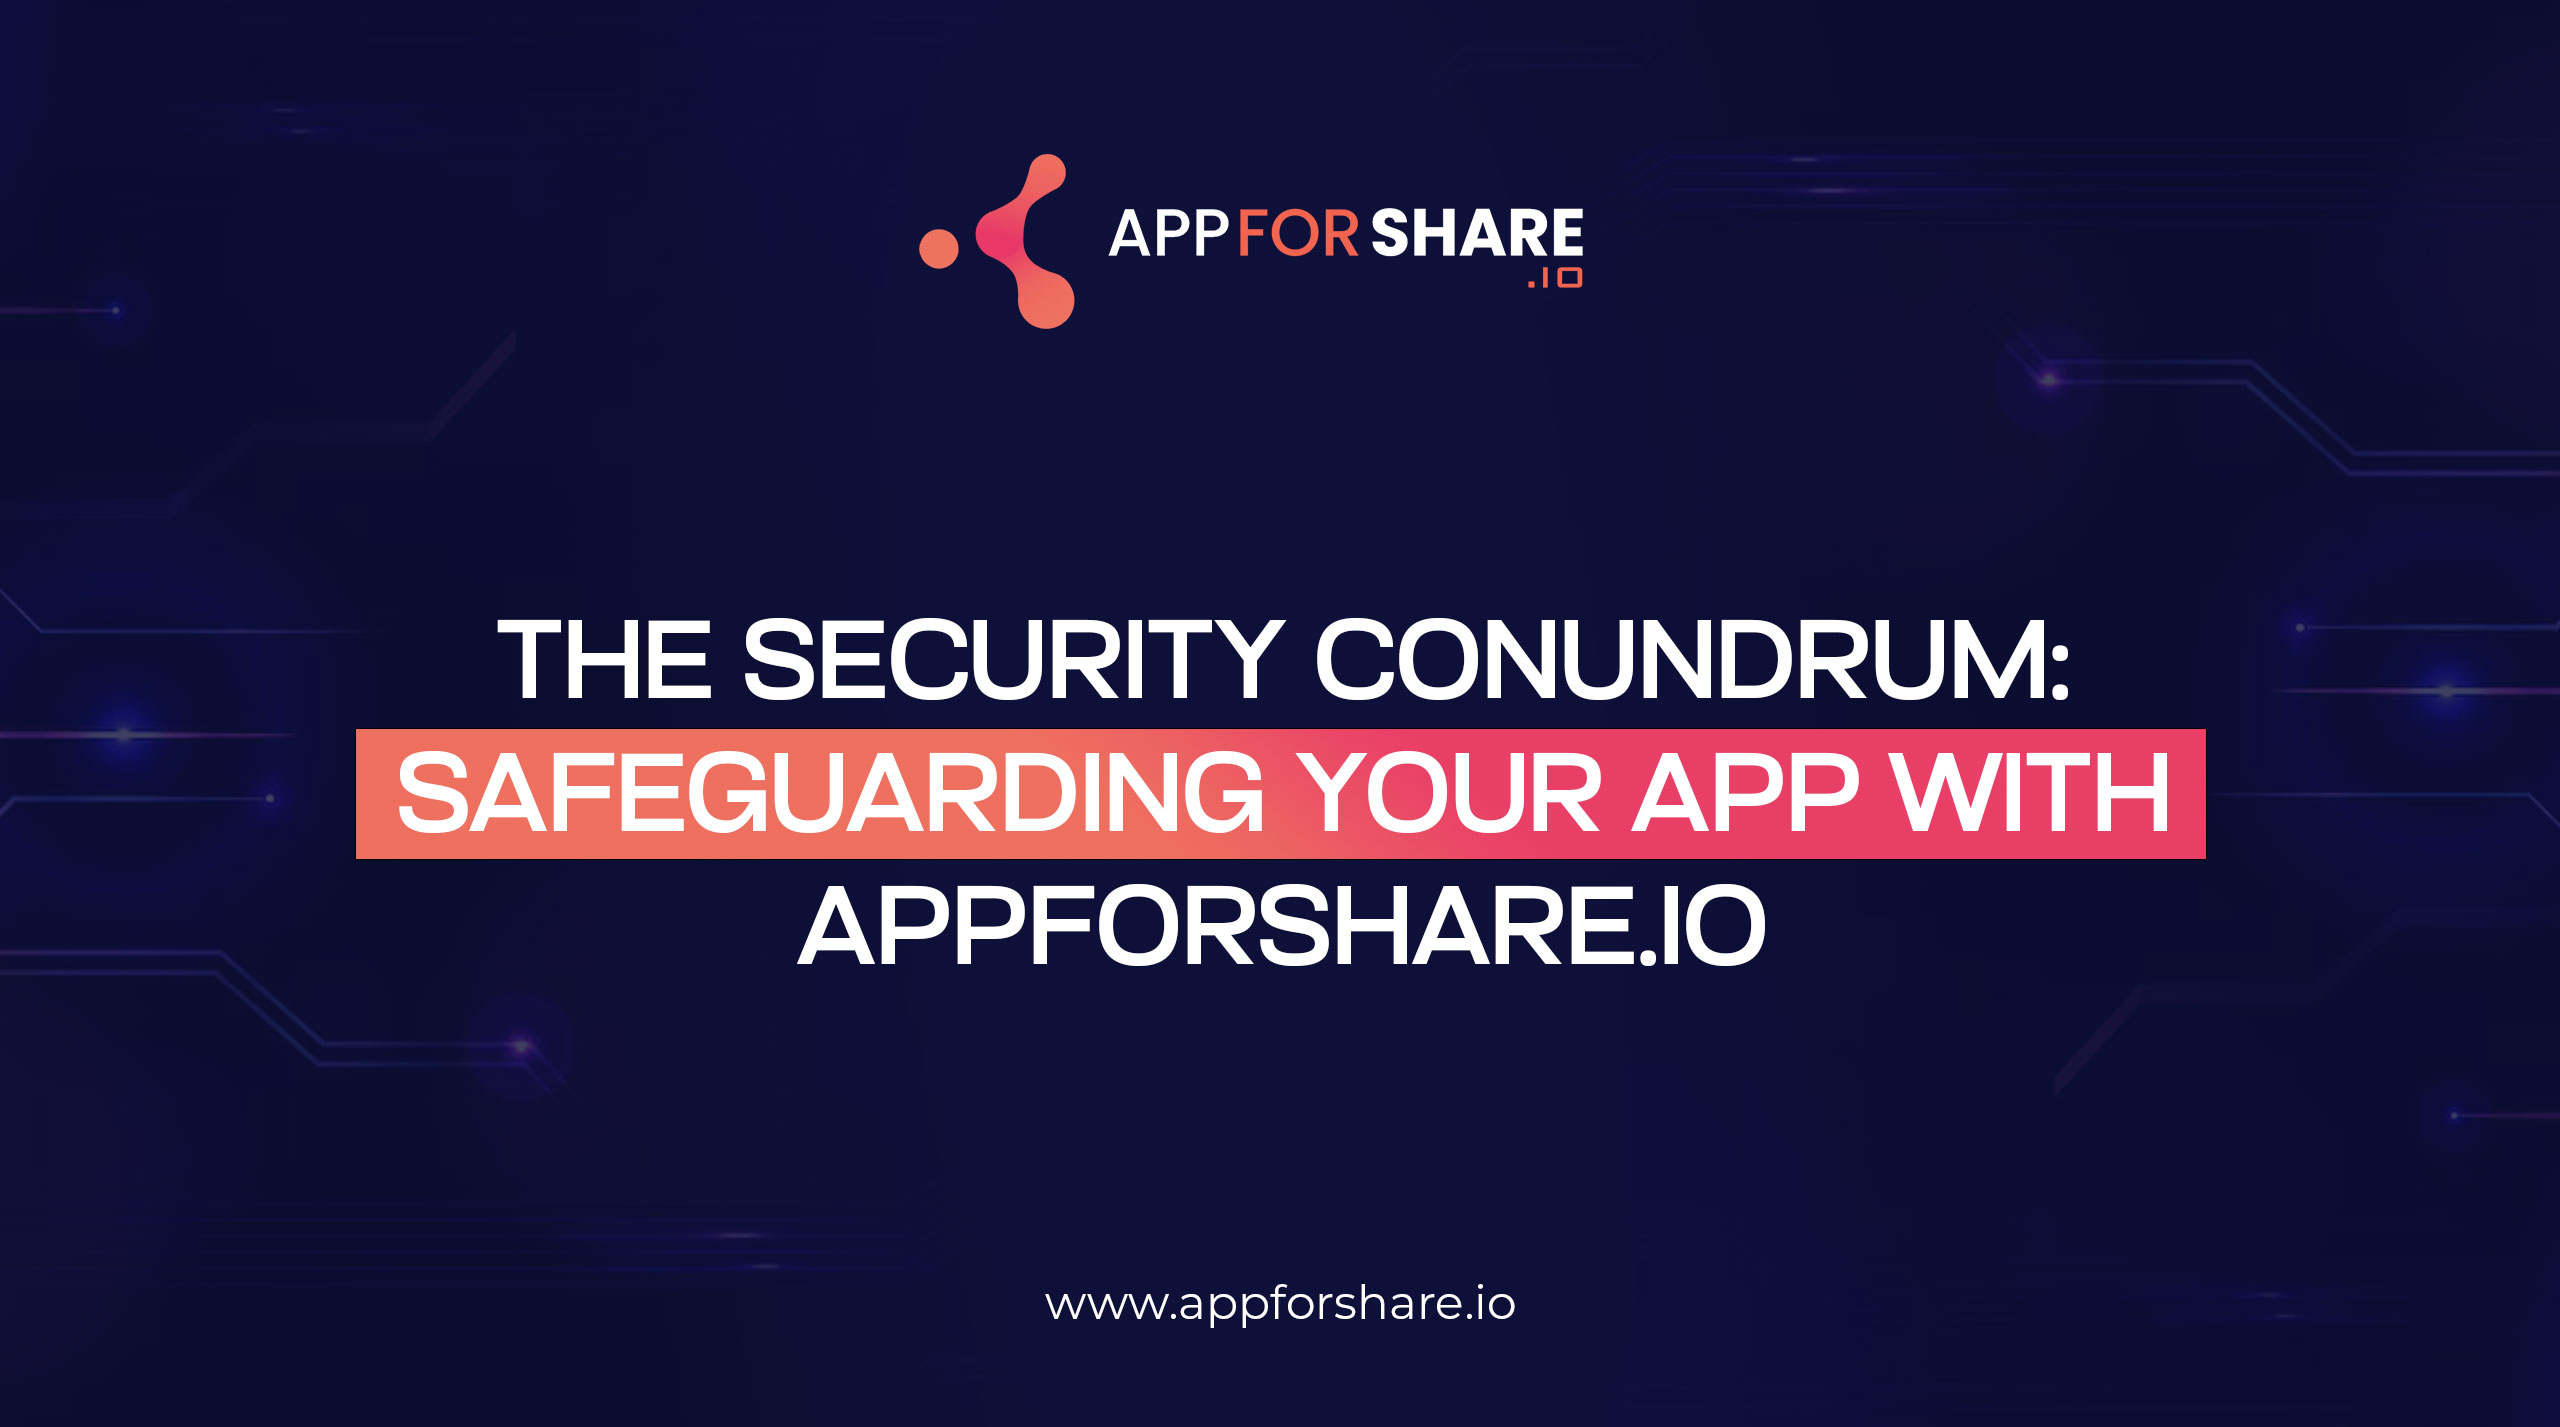 You are currently viewing The Security Conundrum: Safeguarding Your App with appforshare.io